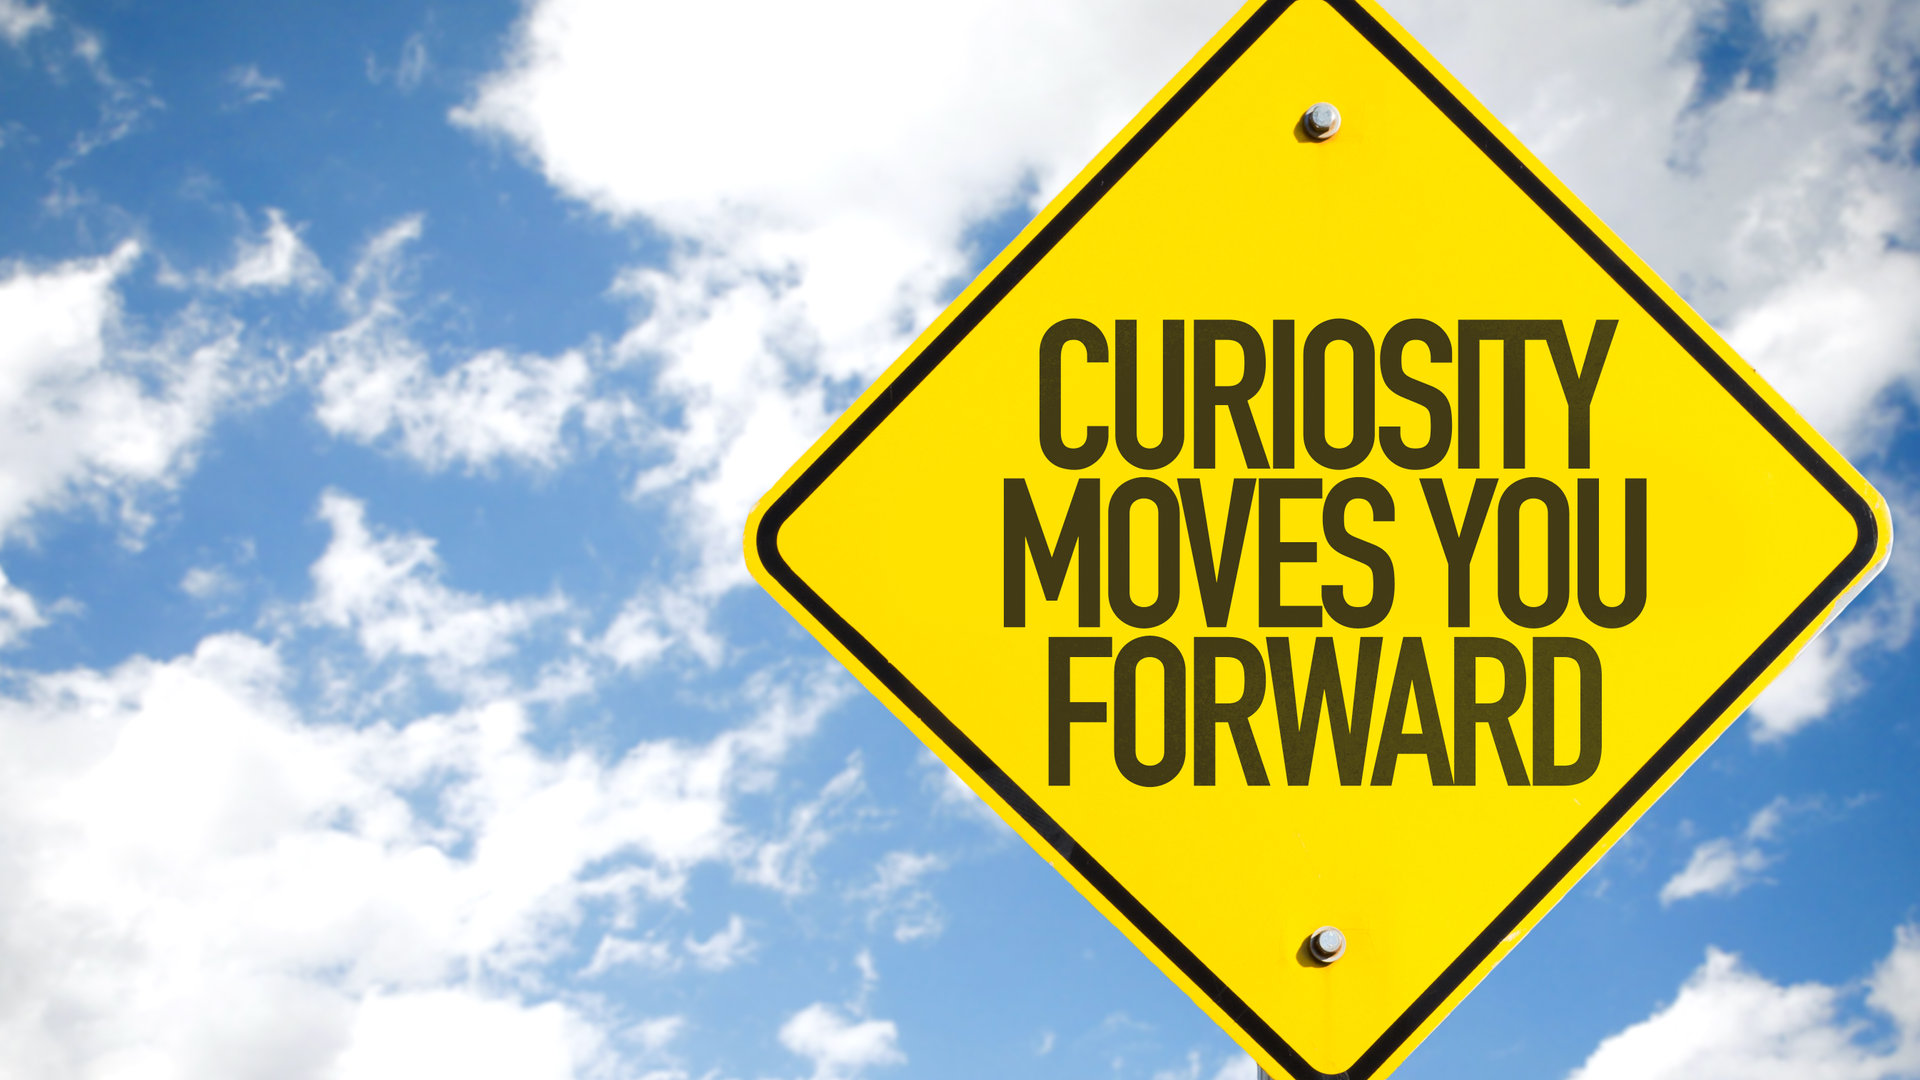 Curiosity moves you forward sign with clouds and sky background